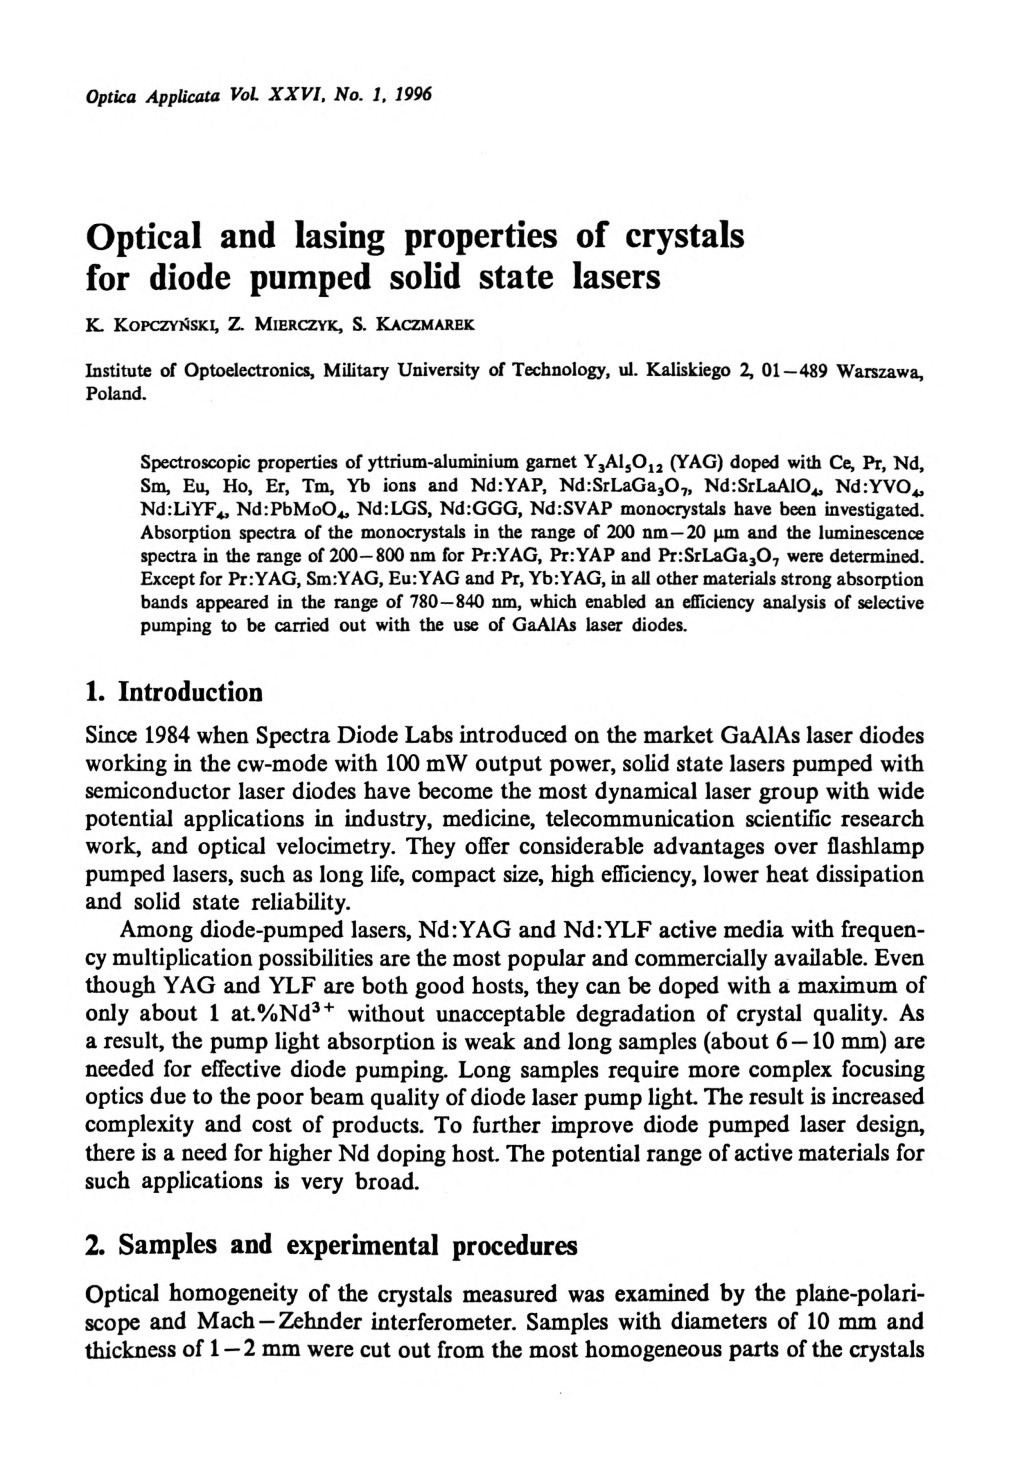 Optical and Lasing Properties of Crystals for Diode Pumped Solid State Lasers